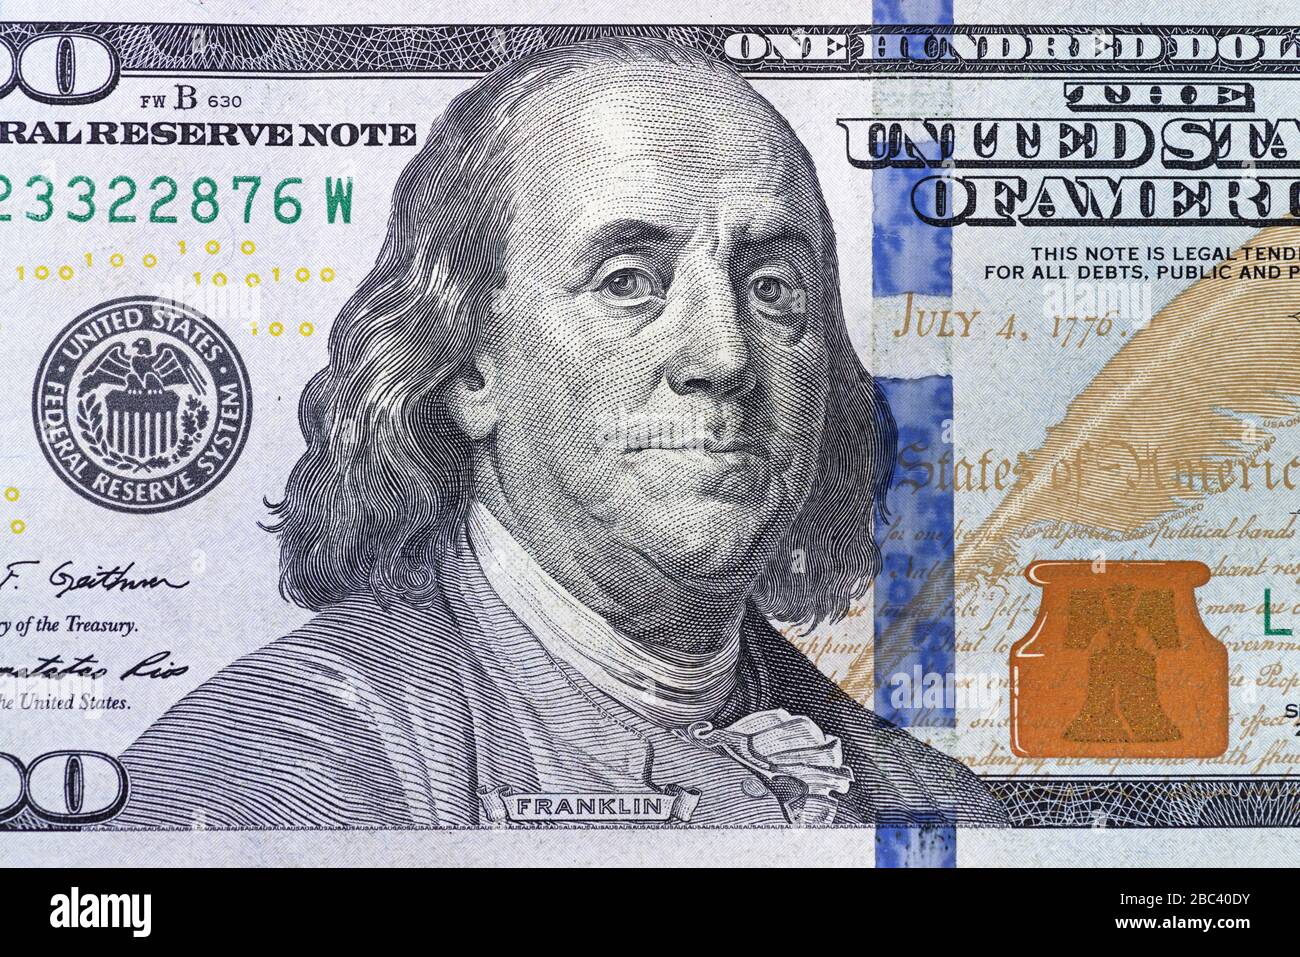 close up of the Benjamin Franklin portrait on the US 100 dollar bill Stock Photo